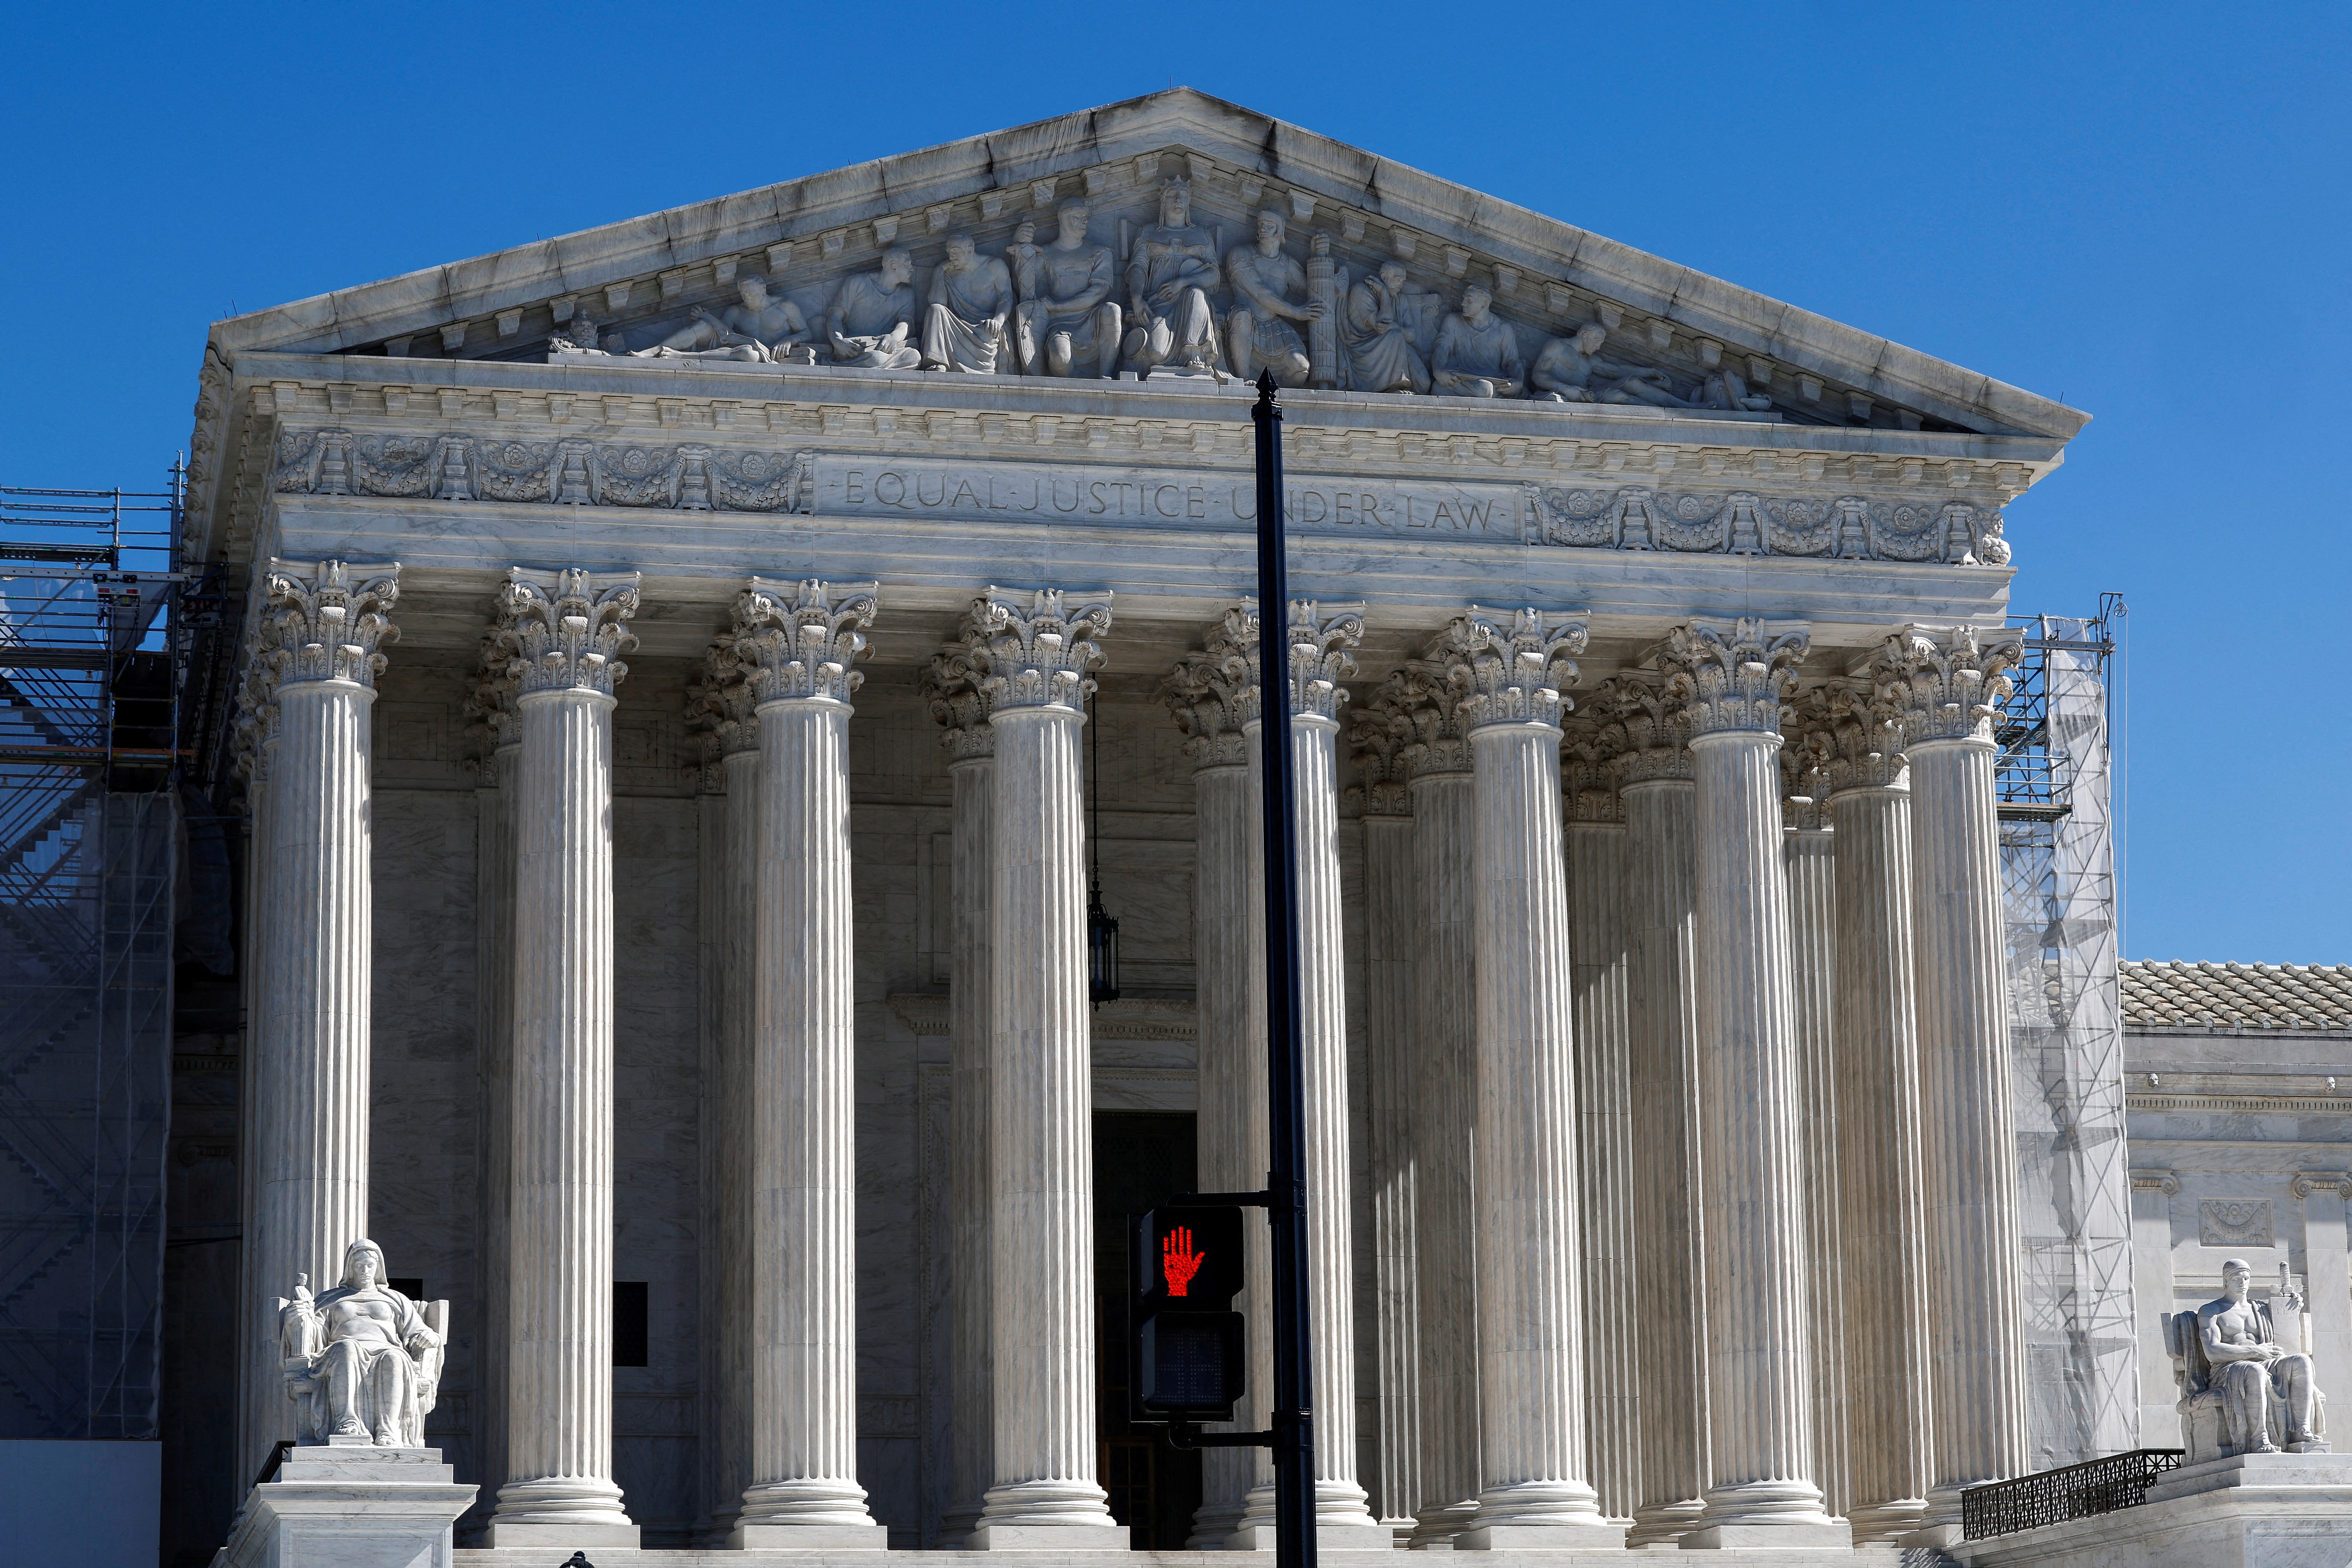 The United States Supreme Court building in Washington